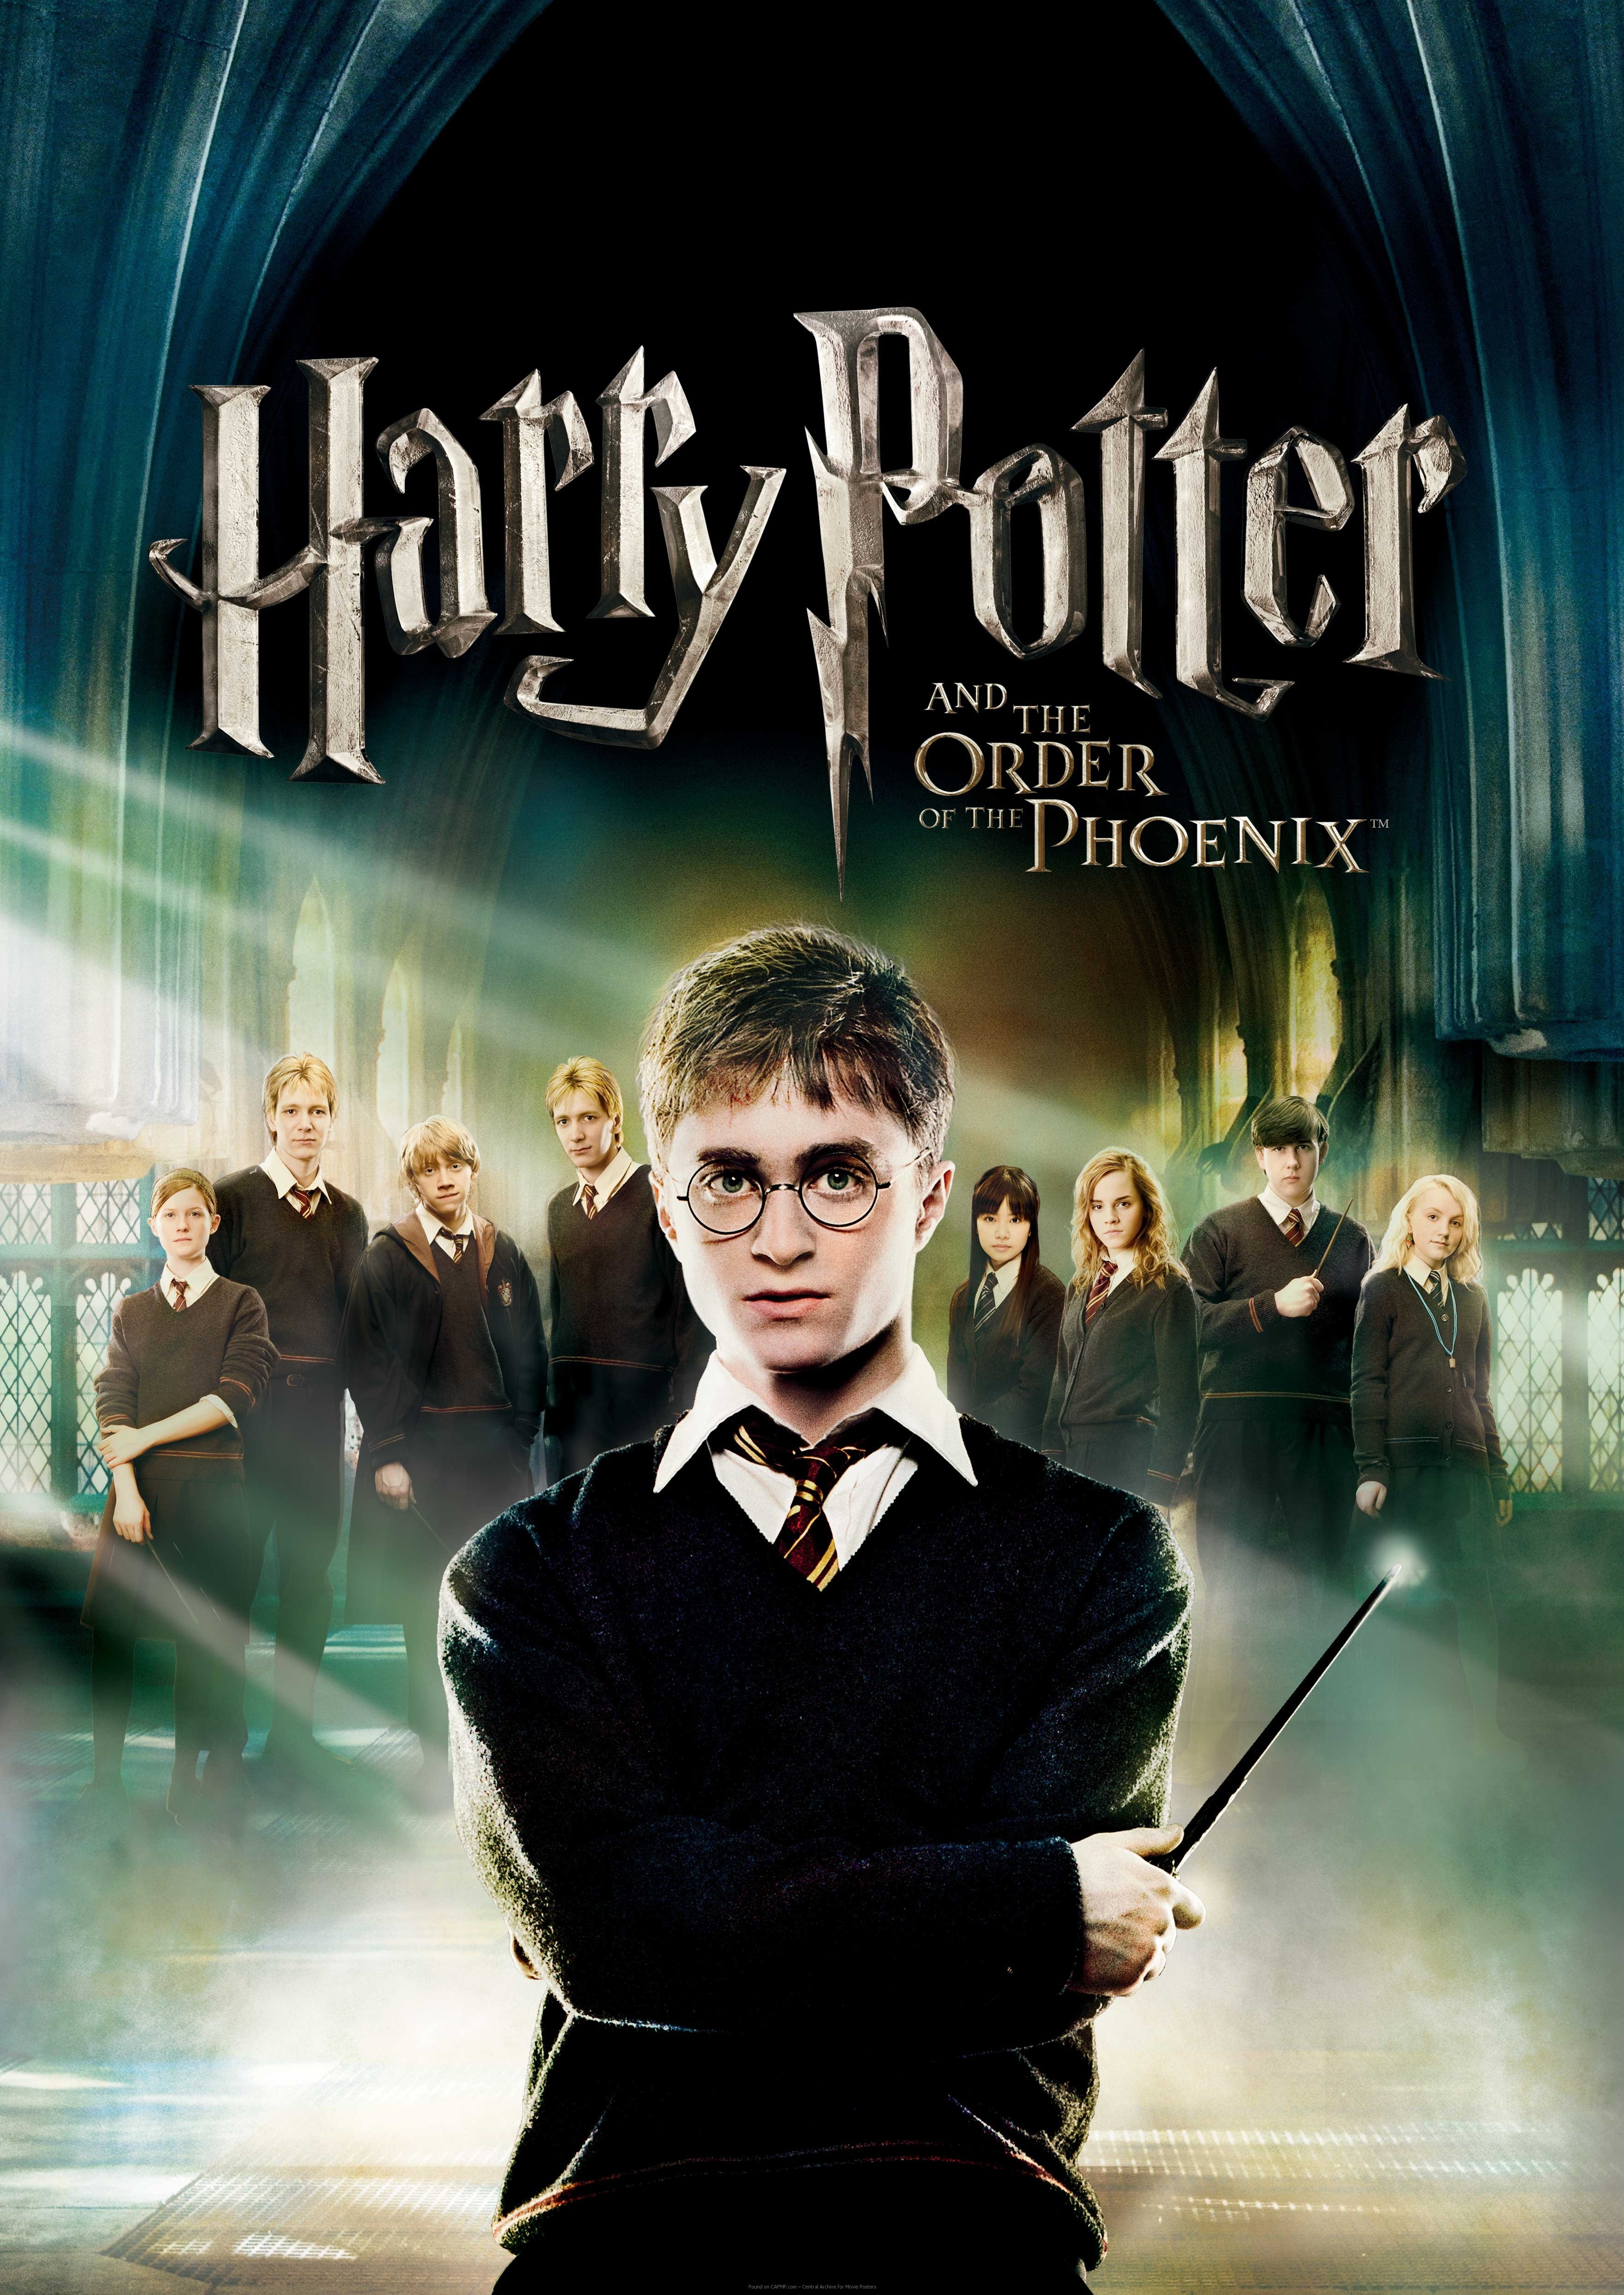 Movie Poster »Harry Potter and the Order of the Phoenix« on CAFMP